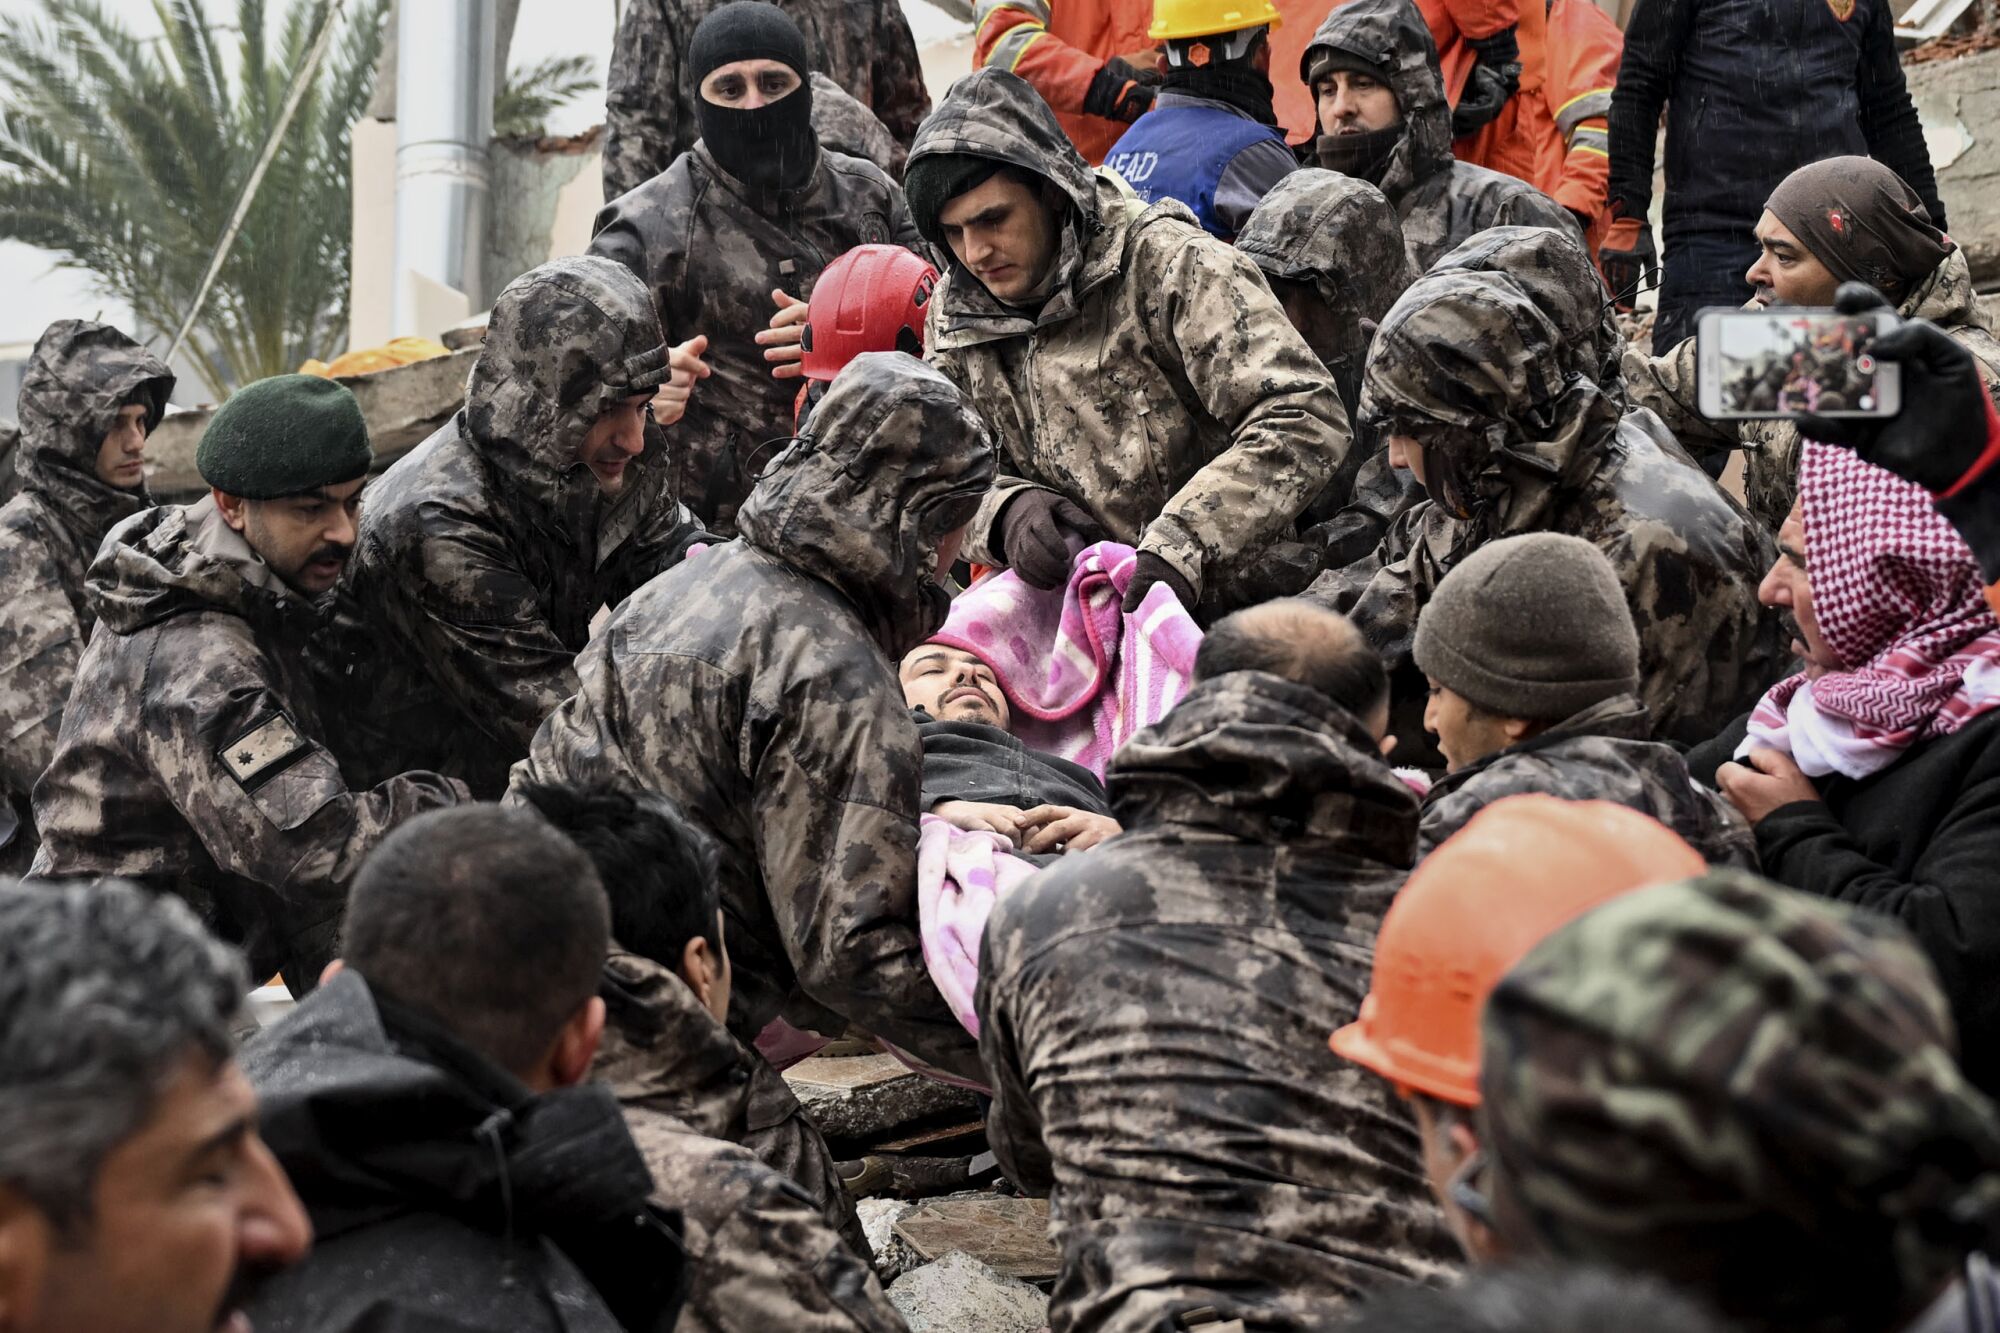 A man, wrapped in a pink blanket, is carried by a group of men in brown military camouflage jackets